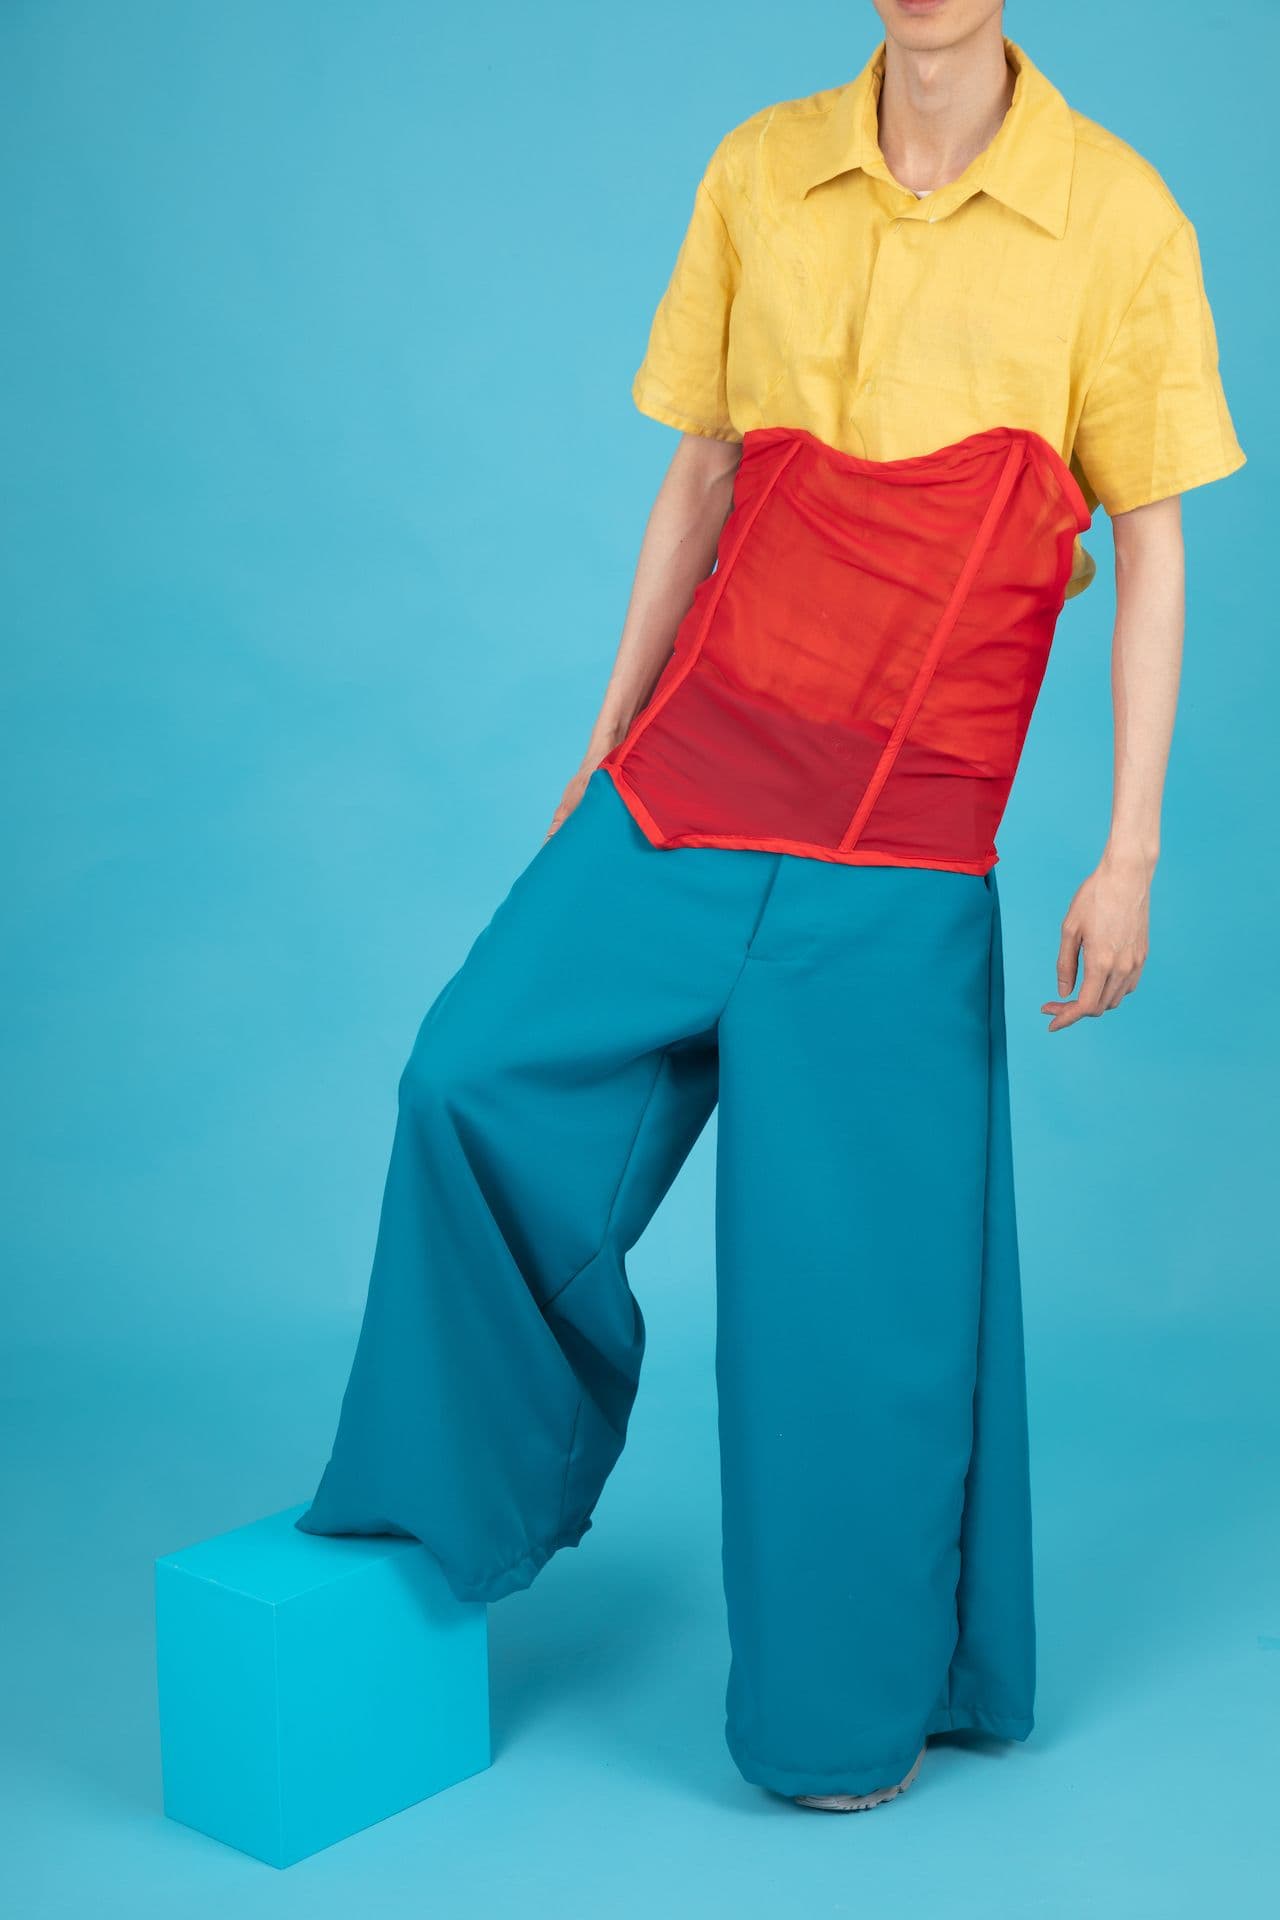 Person standing in a blue room wearing blue pants, red corset and yellow shirt.